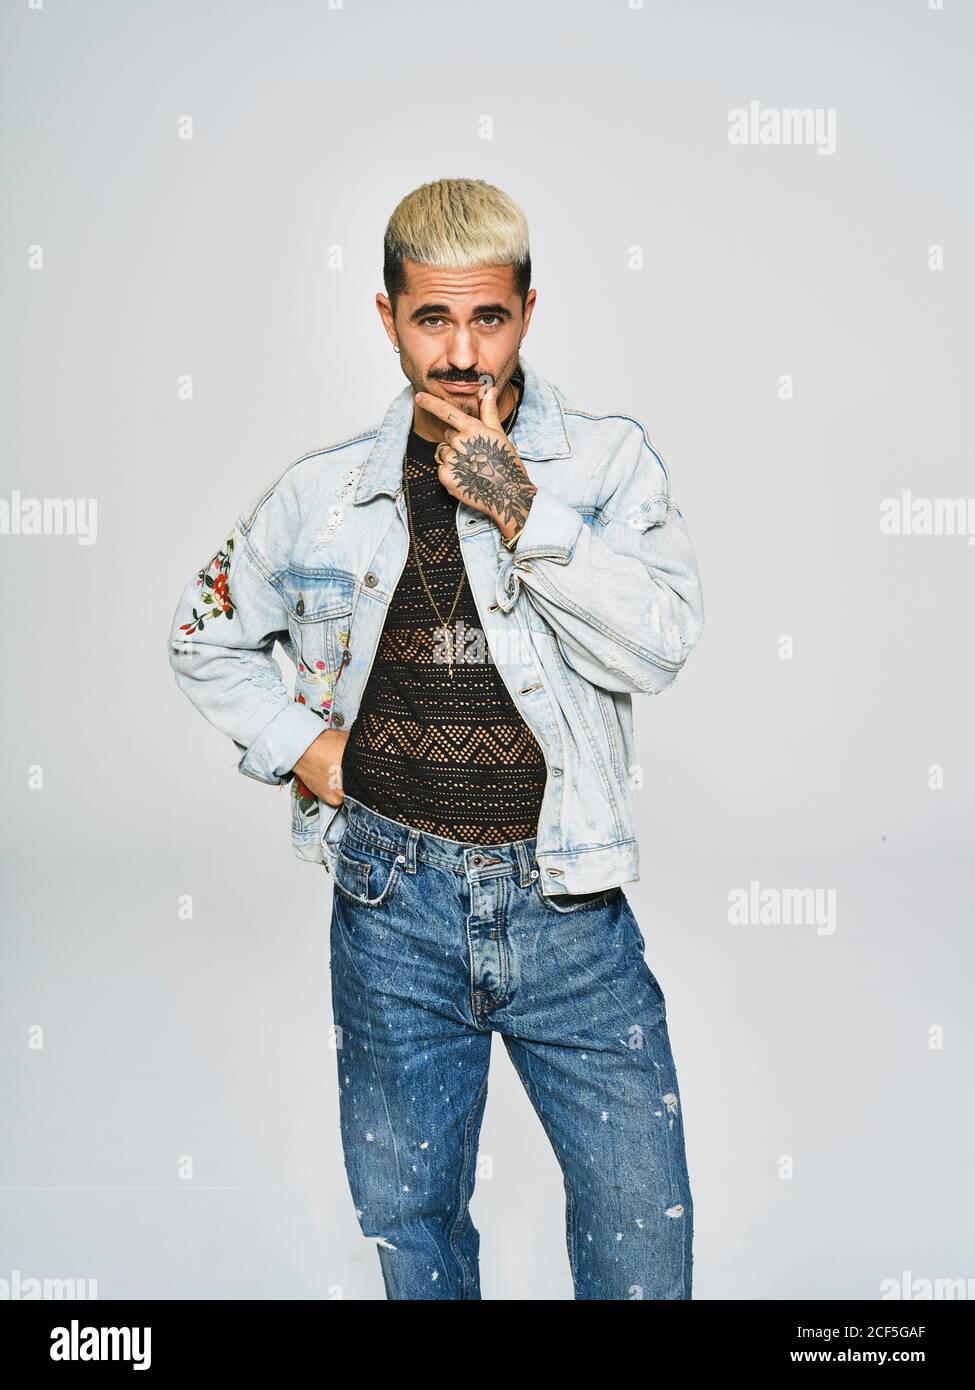 Young ethnic man making grimace doubting face looking at camera wearing trendy denim jacket with floral pattern while standing against gray background Stock Photo